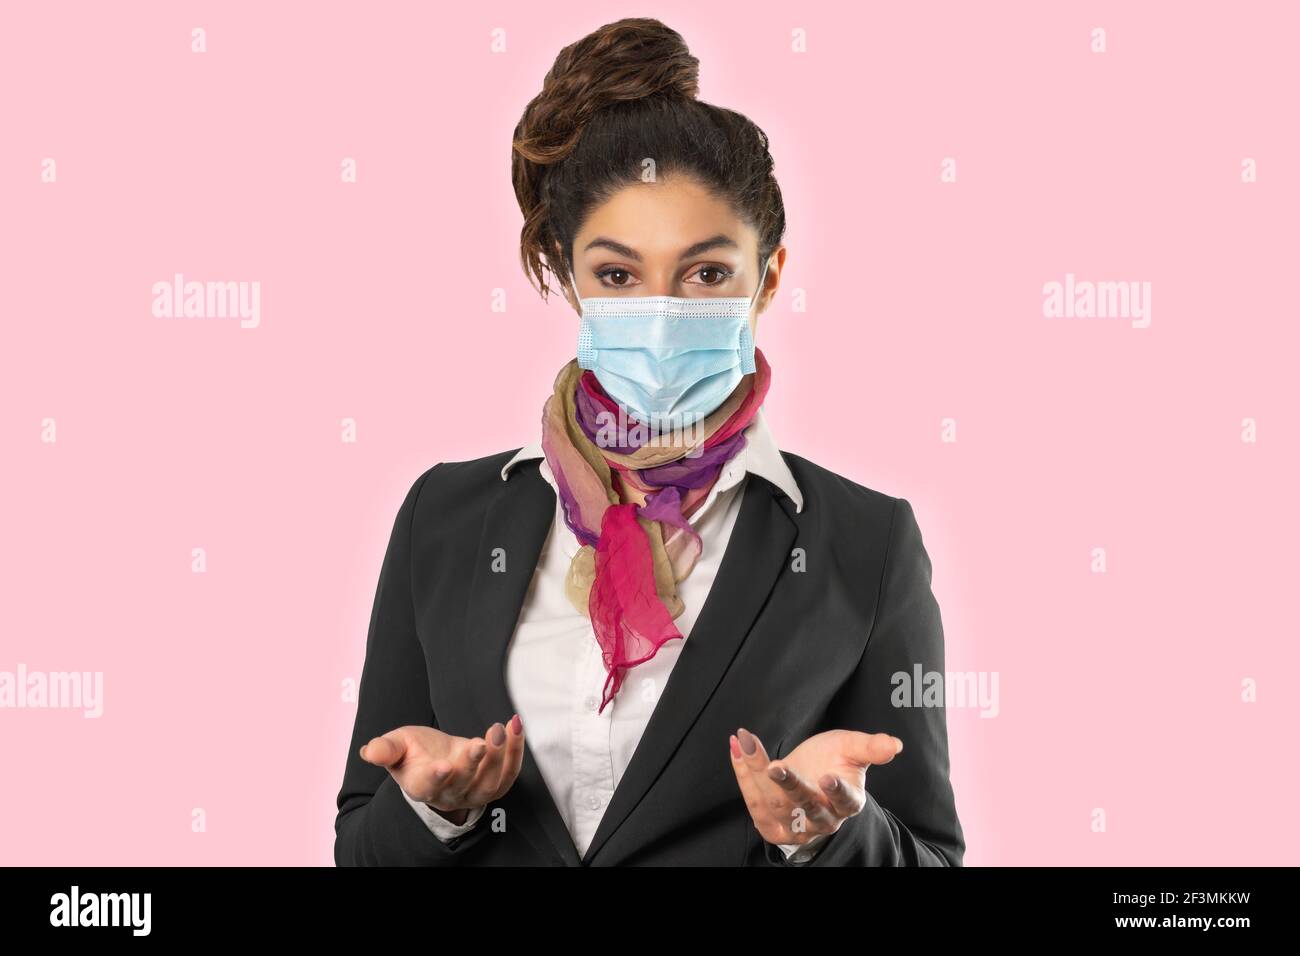 A beautiful flight attendant with surgical mask, multicolored scarf and black jacket. Subject on a pink background. Perfect shot for women at work, pa Stock Photo